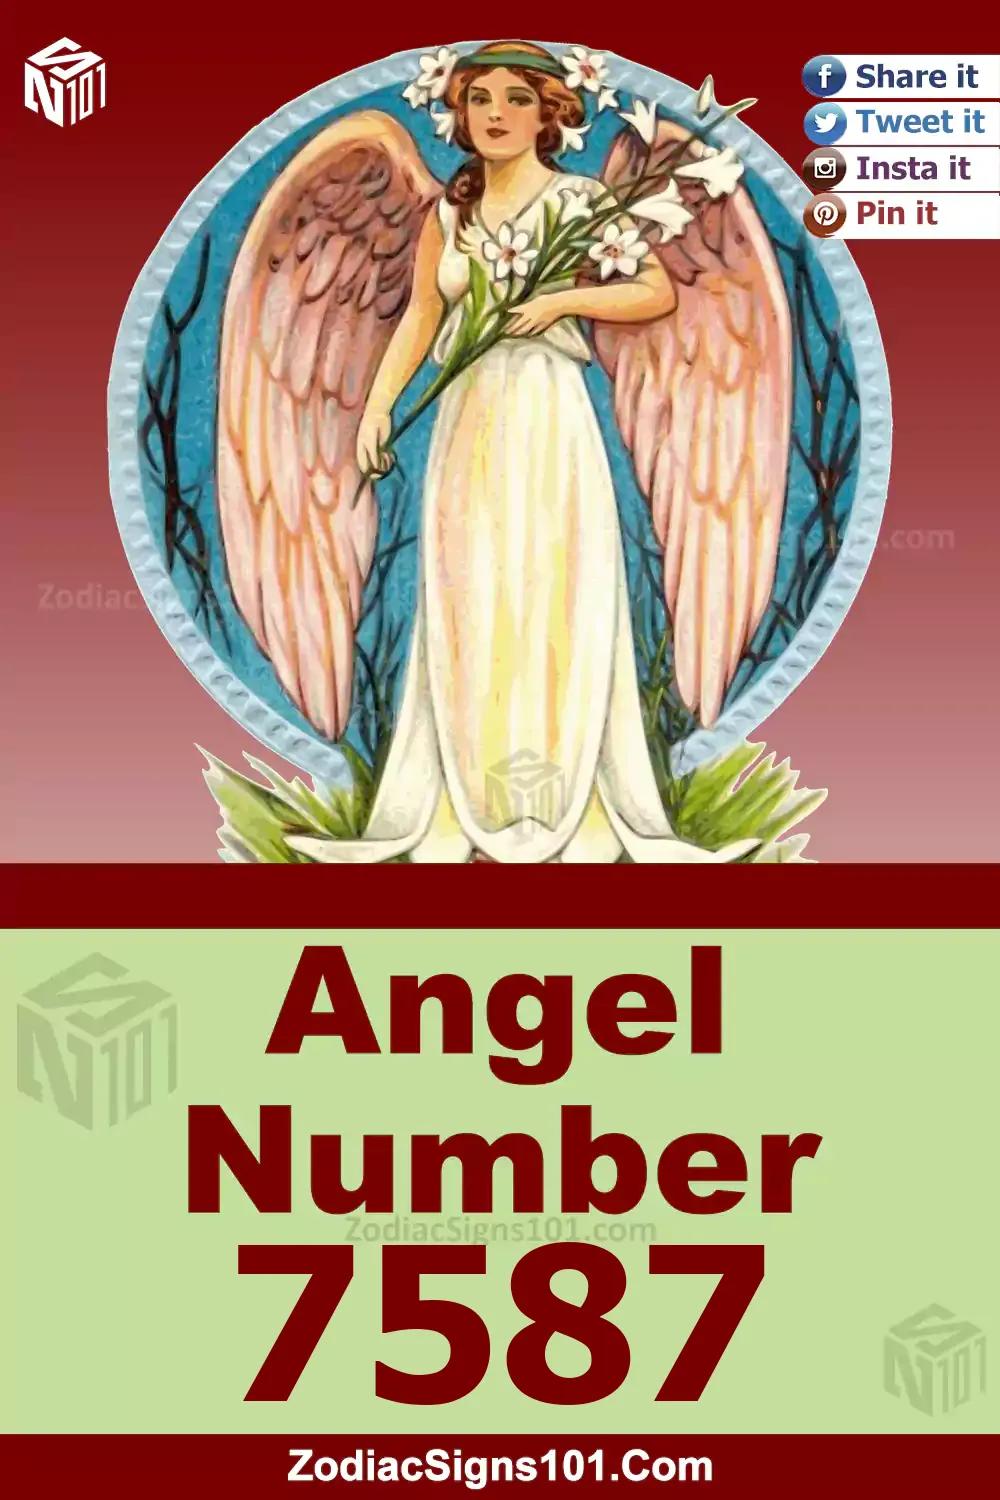 7587 Angel Number Meaning